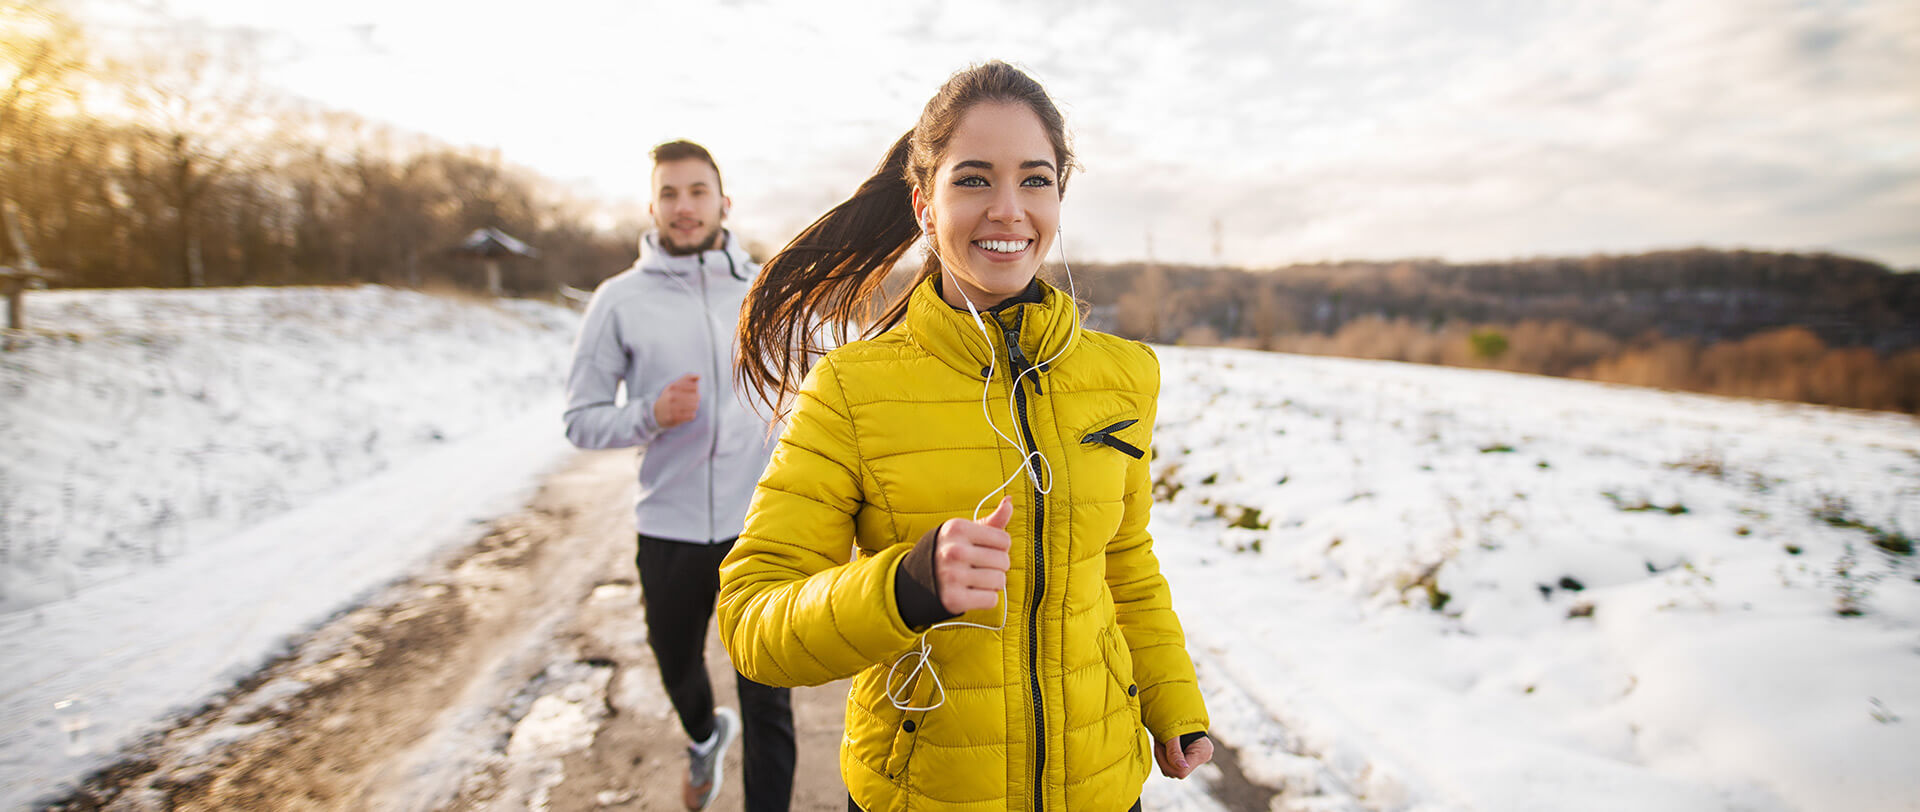 Smiling couple running along a snowy, wintry road.